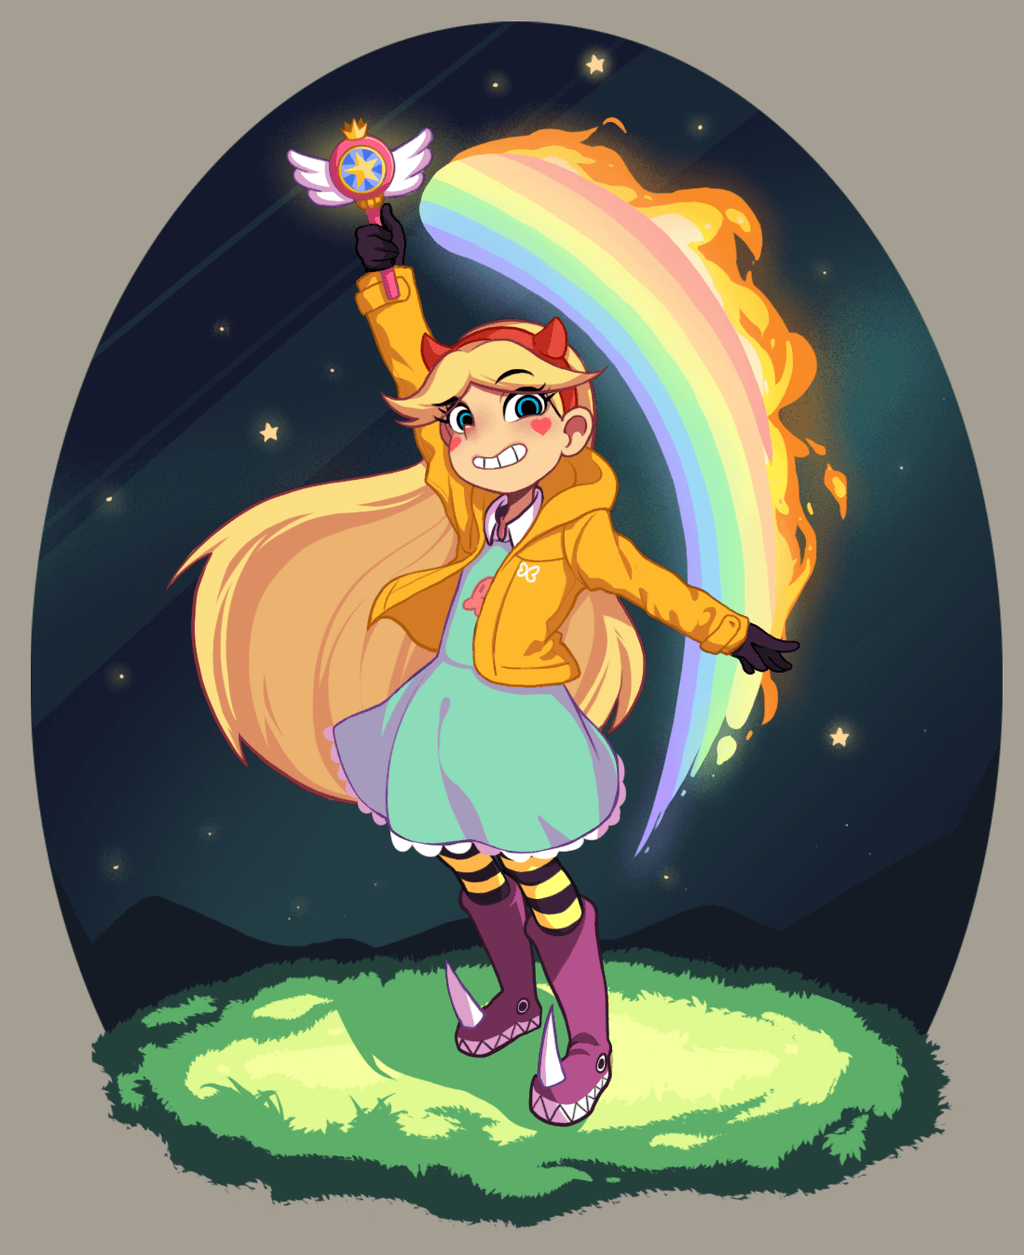 Star vs the Forces of Evil by eoqudtkdl